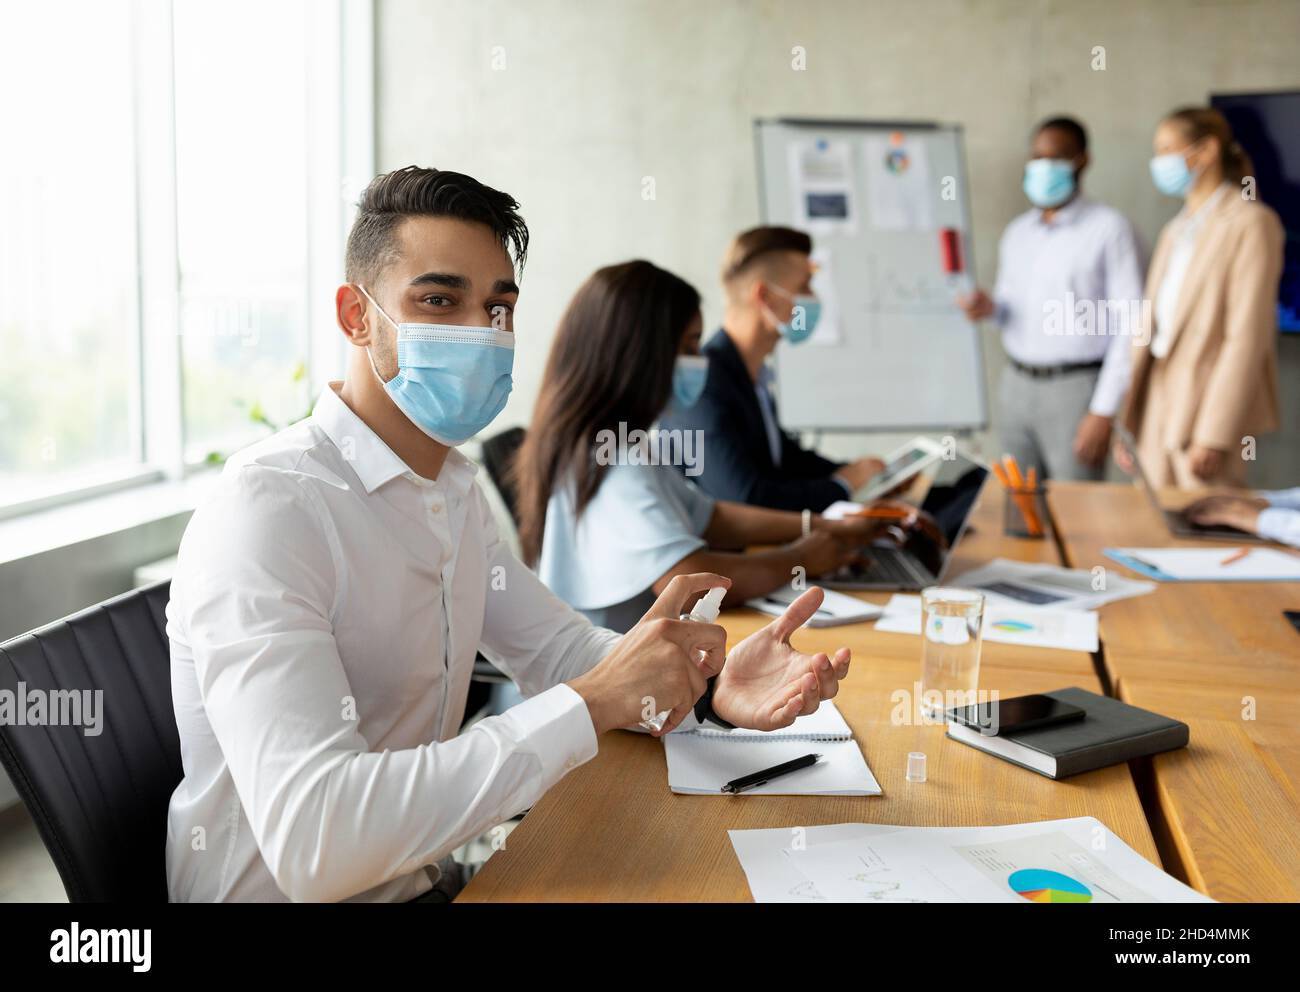 Workplace Safety. Arab Businessman Wearing Medical Mask Using Disinfectant Spray In Office Stock Photo